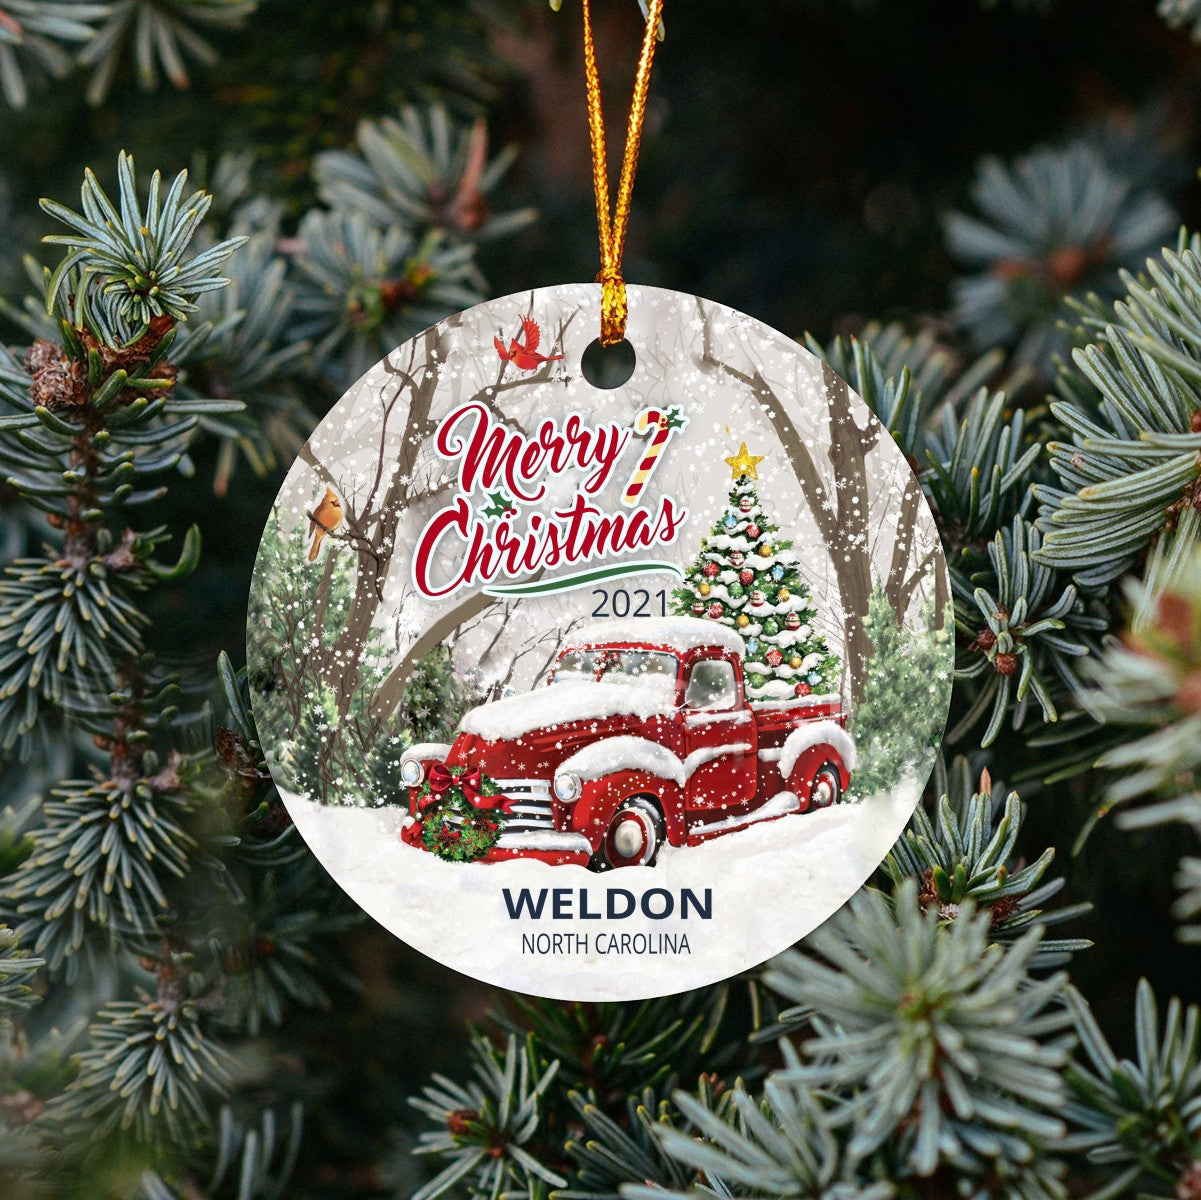 Christmas Tree Ornaments Weldon - Ornament With Name City, State Weldon North Carolina NC Ornament - Red Truck Xmas Ornaments 3'' Plastic Gift For Family, Friend And Housewarming